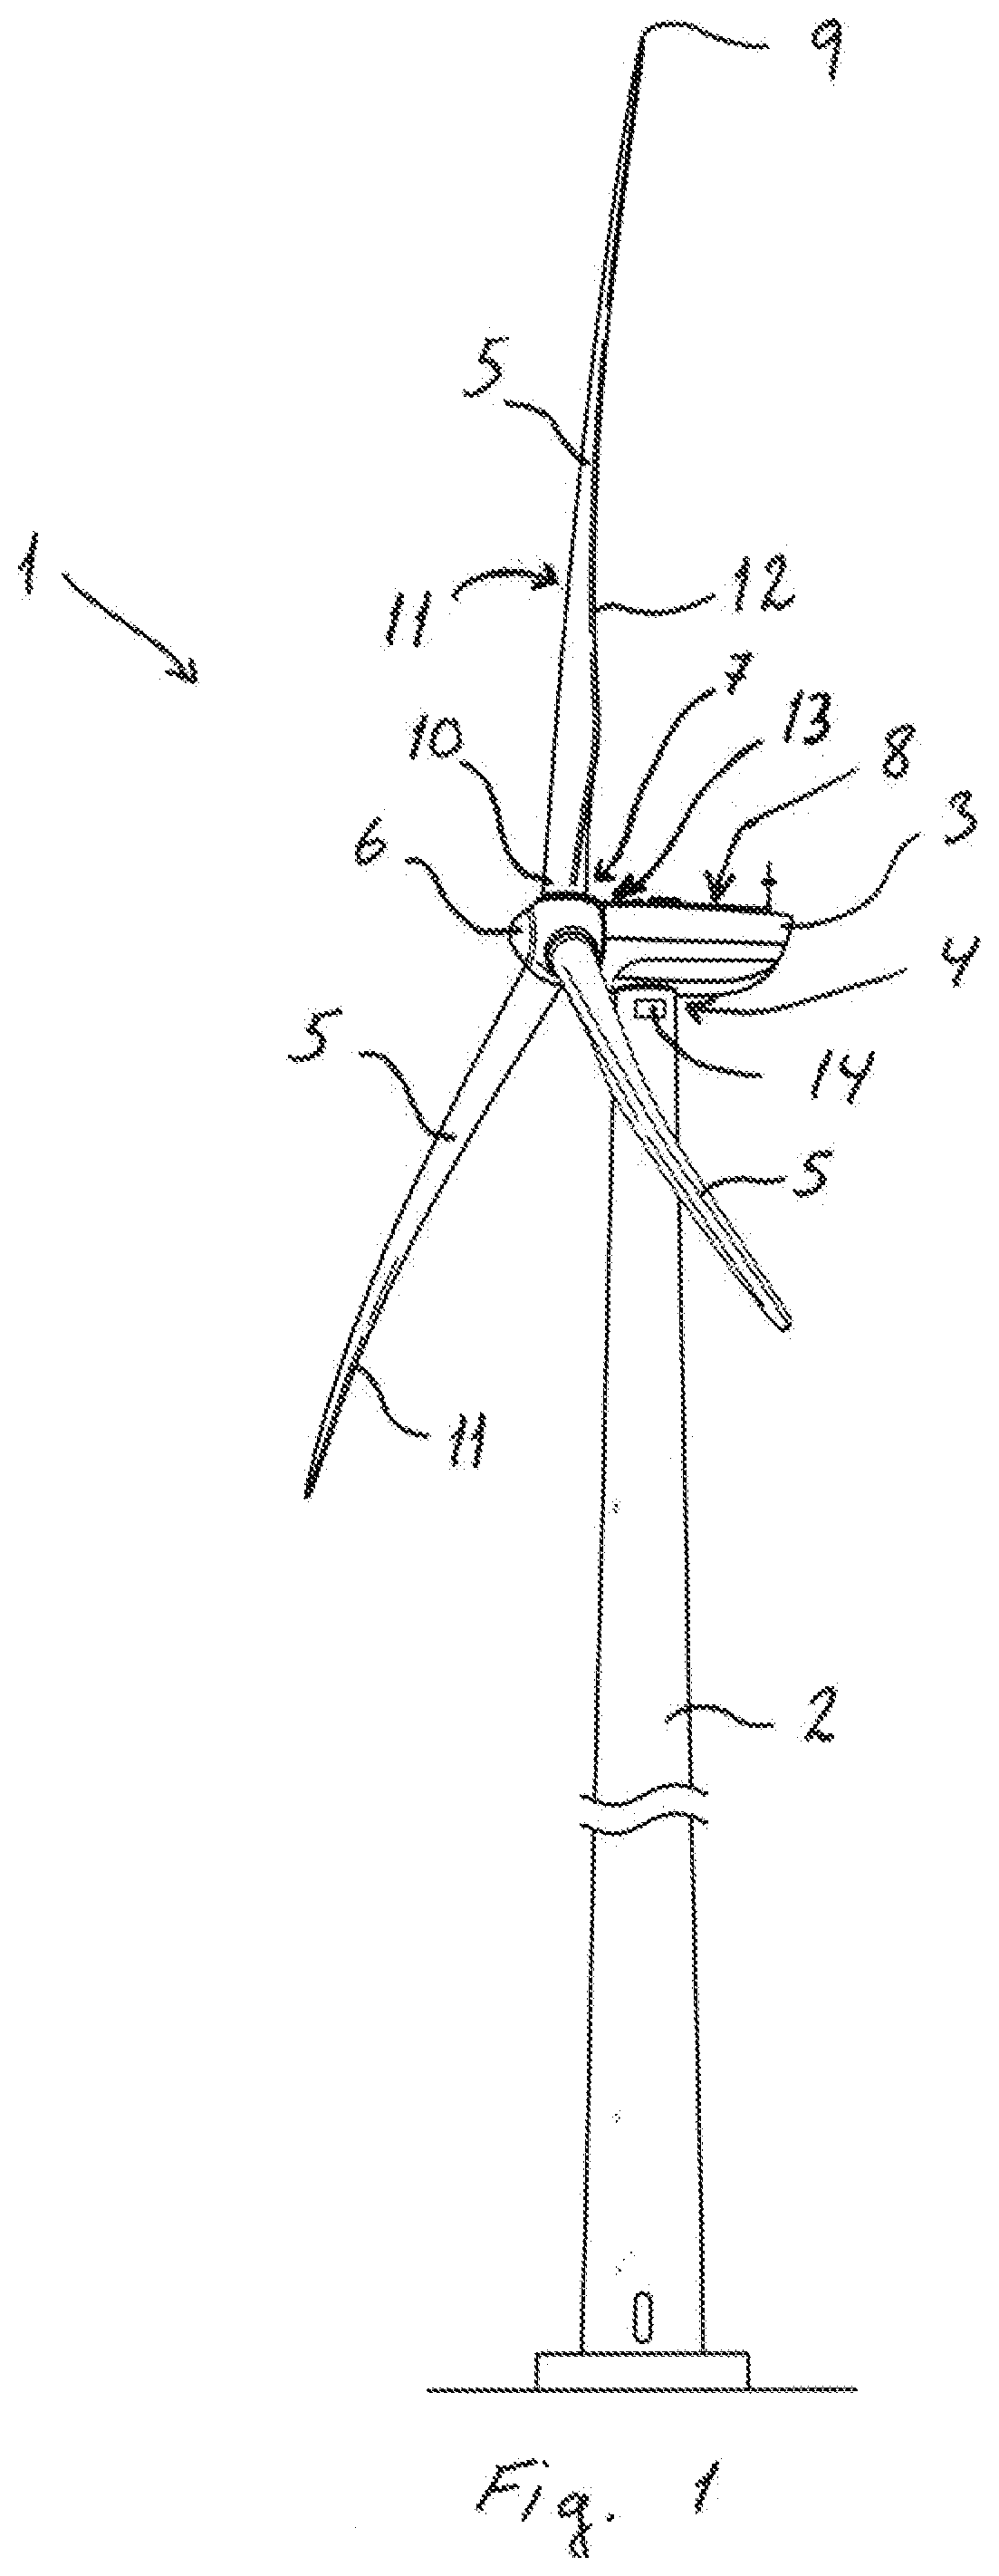 A Wind Turbine and a Method of Operating a Wind Turbine for Reducing Edgewise Vibrations